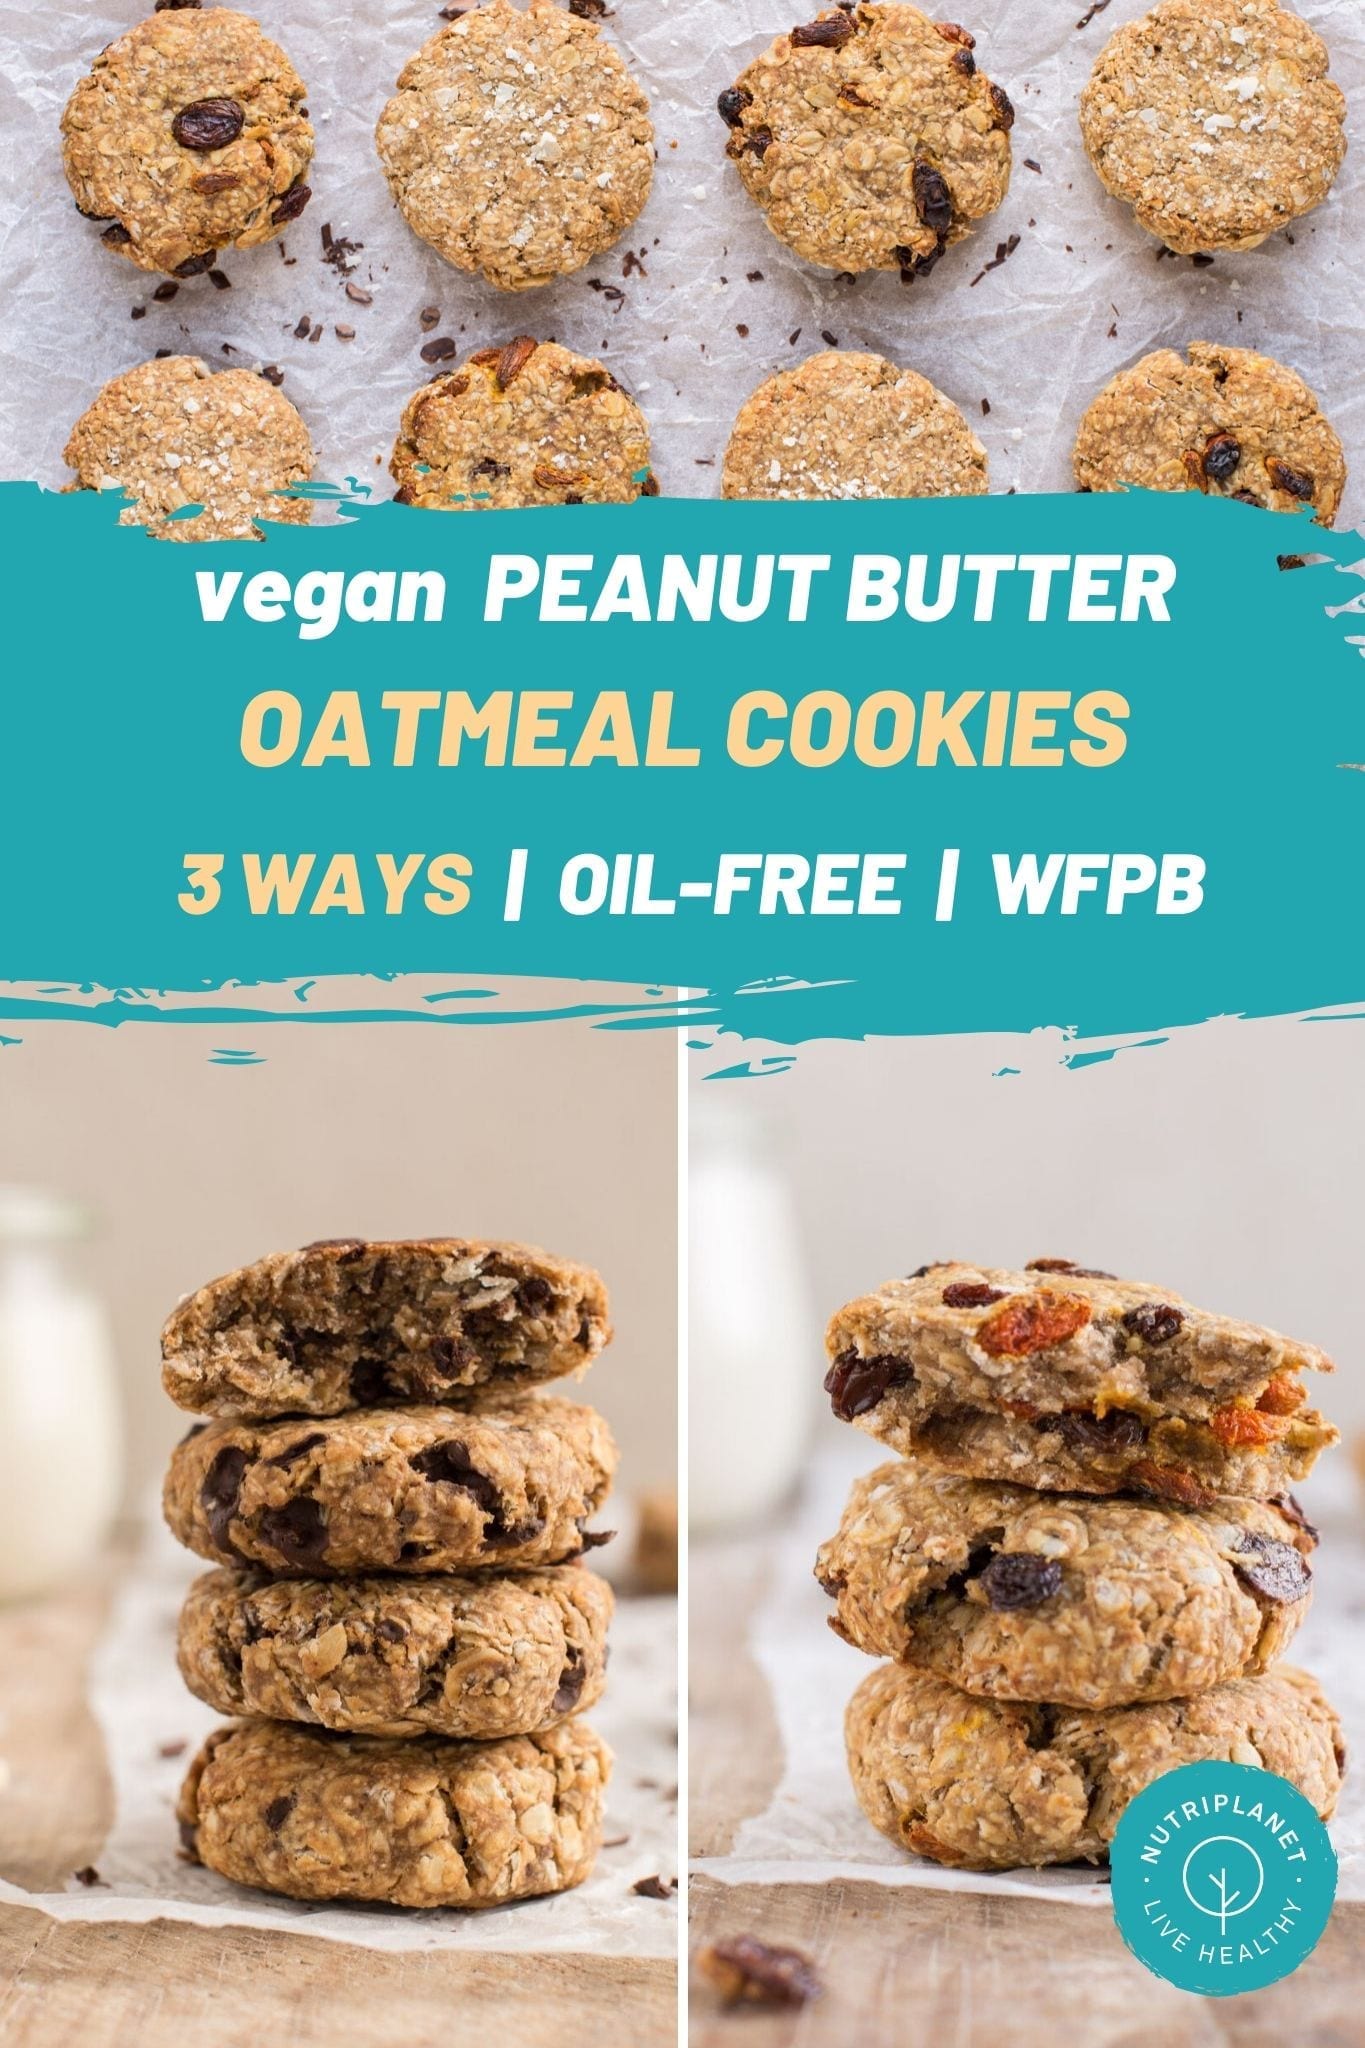 Super easy and delicious vegan oatmeal cookies that are soft and chewy using whole food plant-based ingredients. 